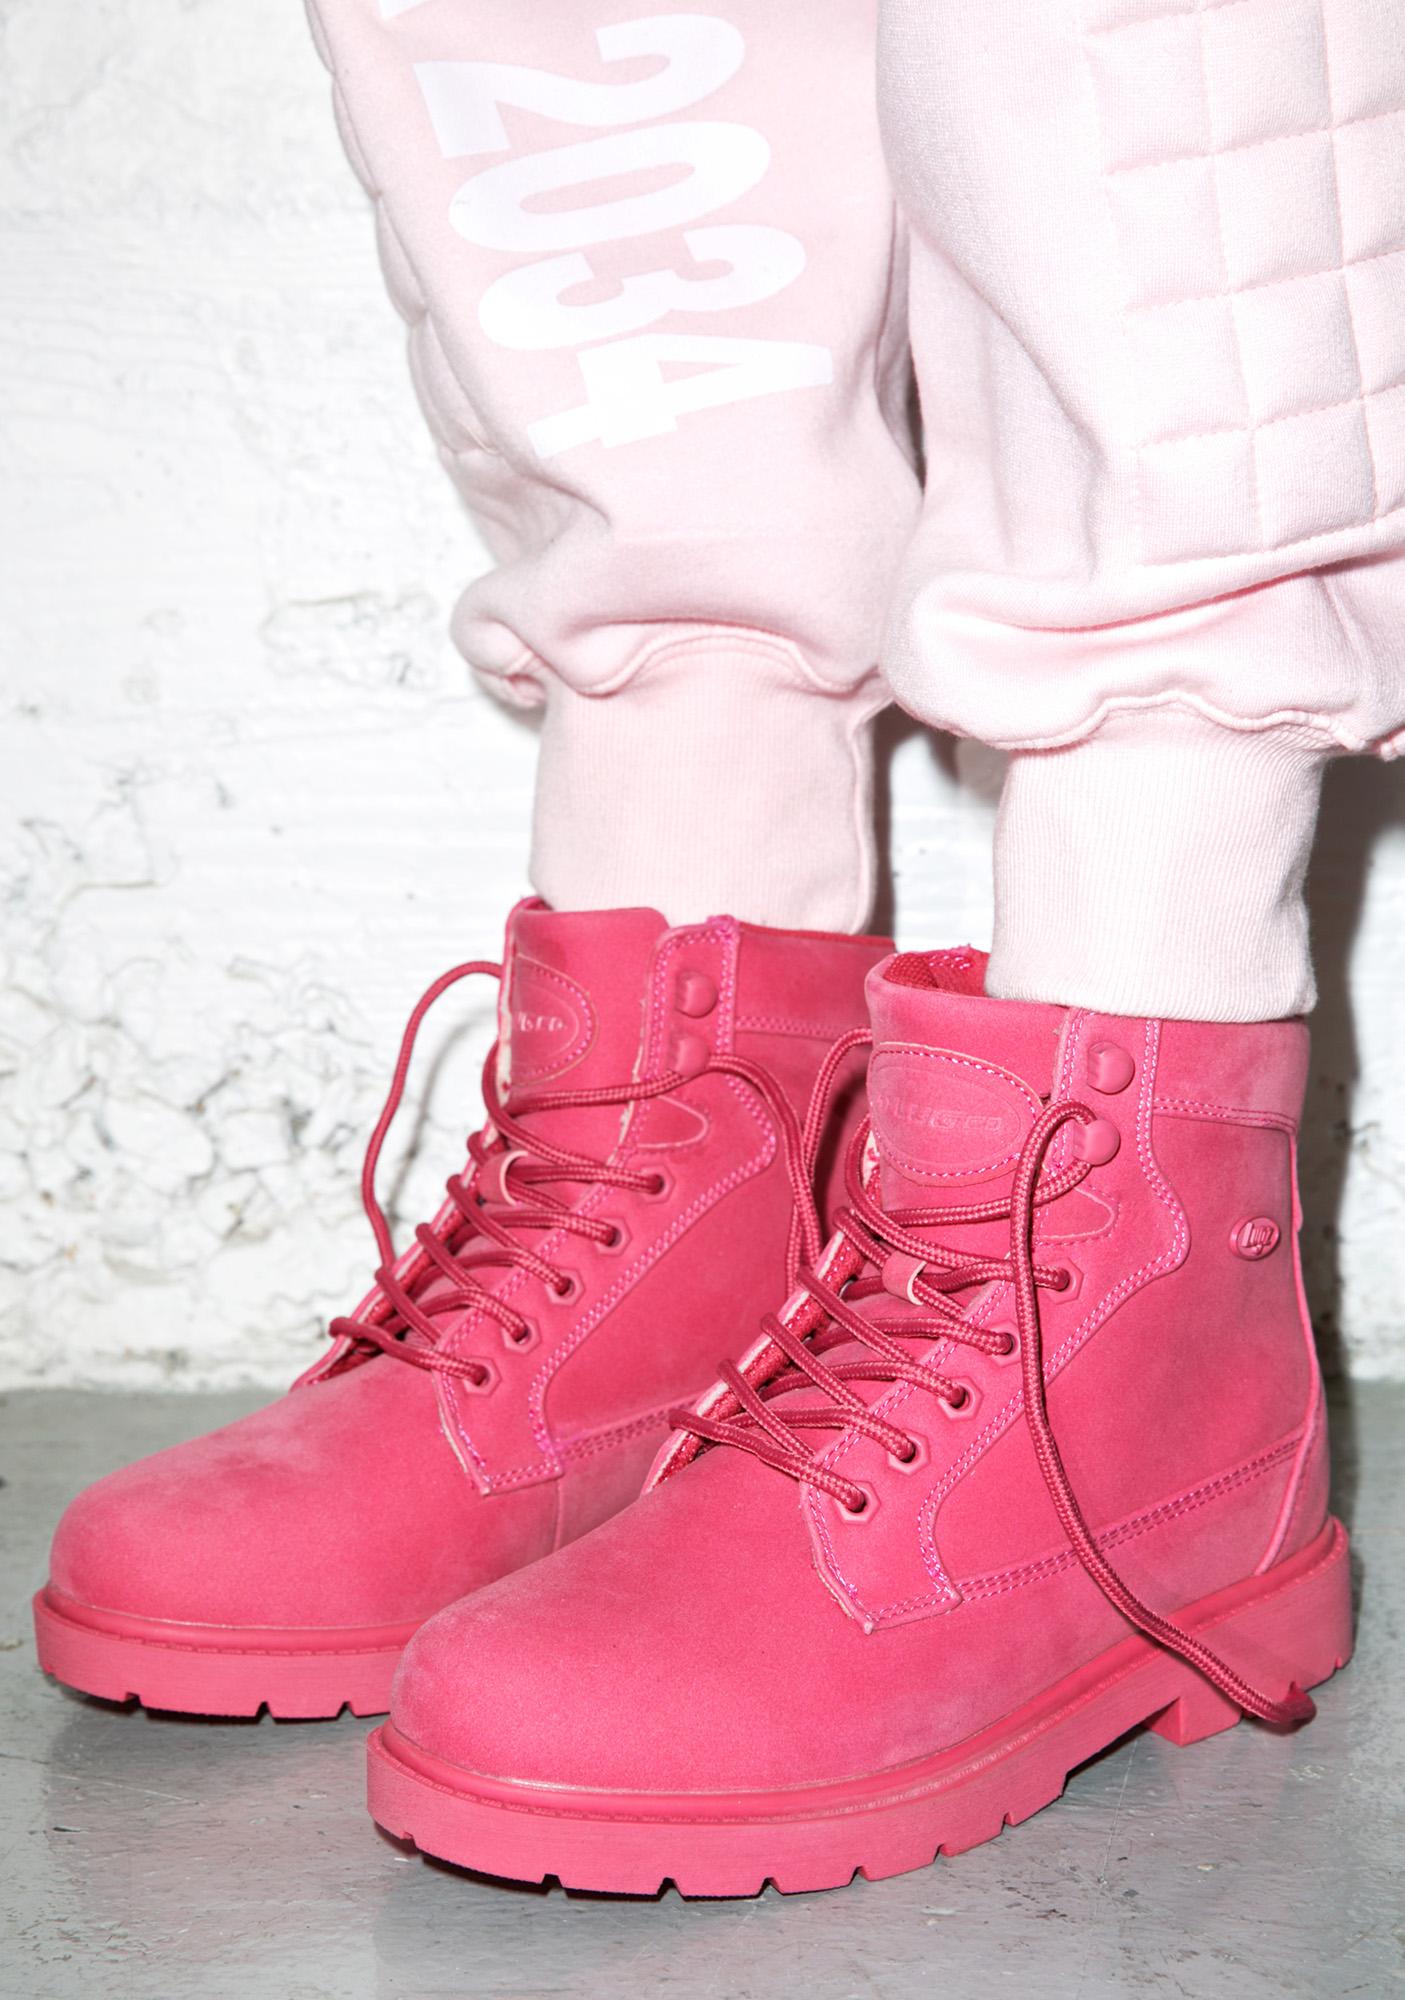 pink lugz boots